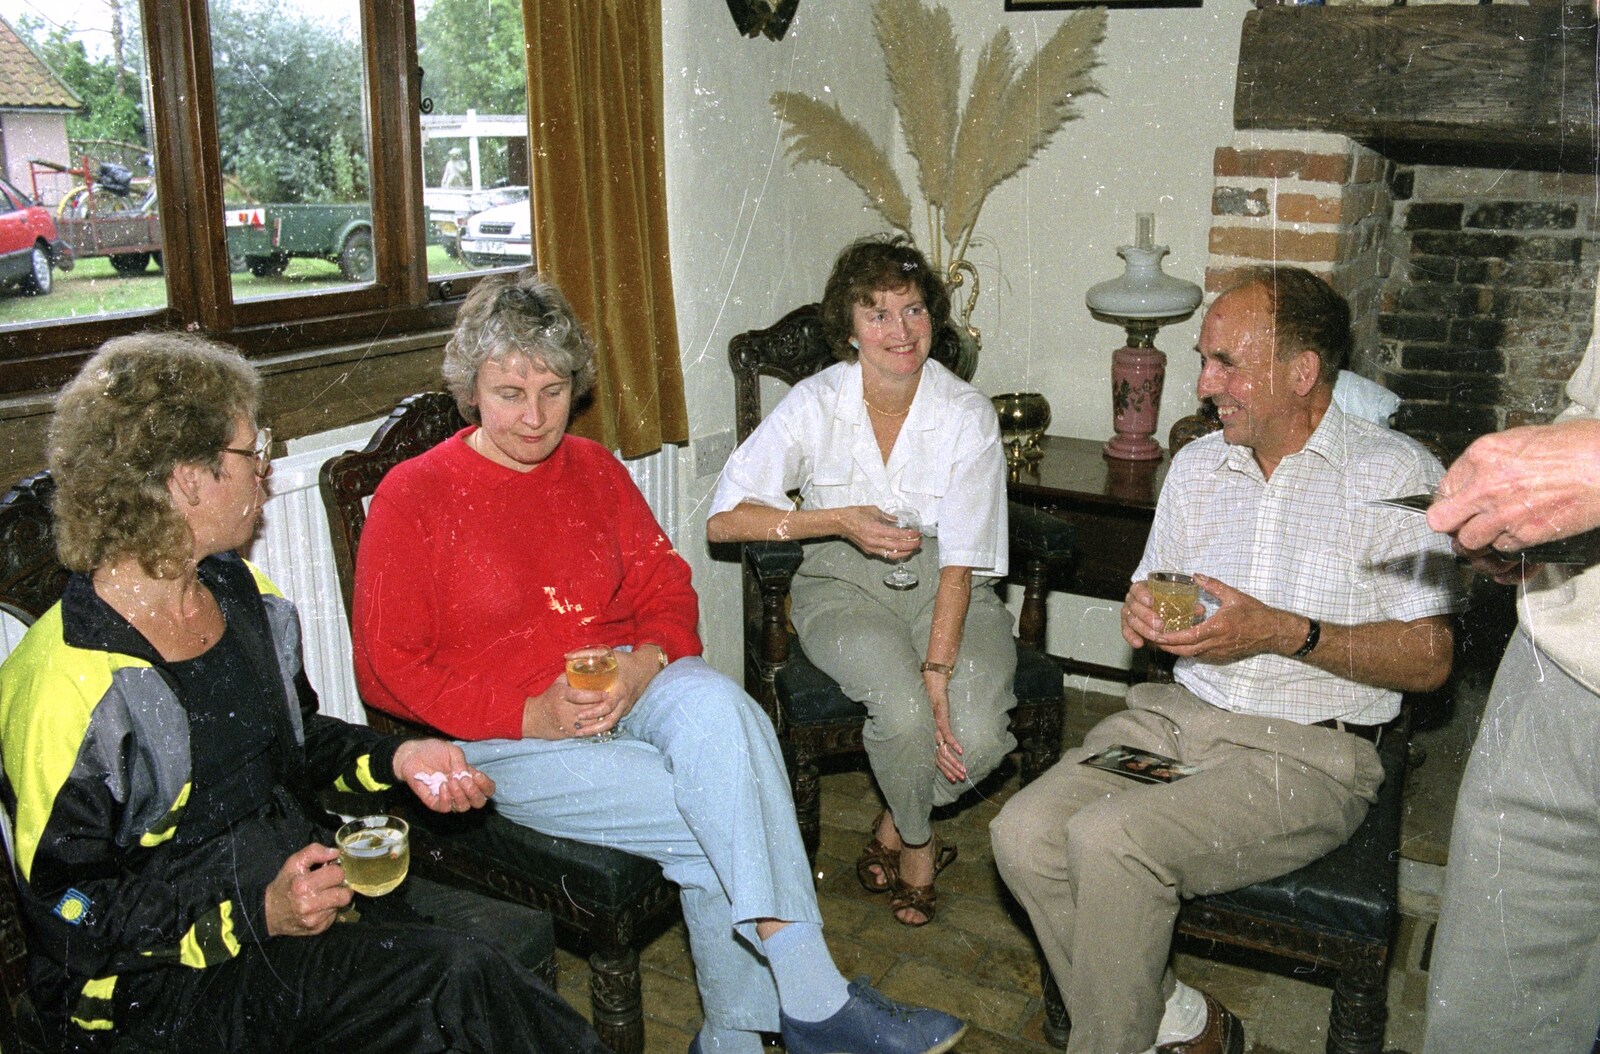 Discussions and cider drinking from A Bike Ride to Redgrave, Suffolk - 11th August 1990